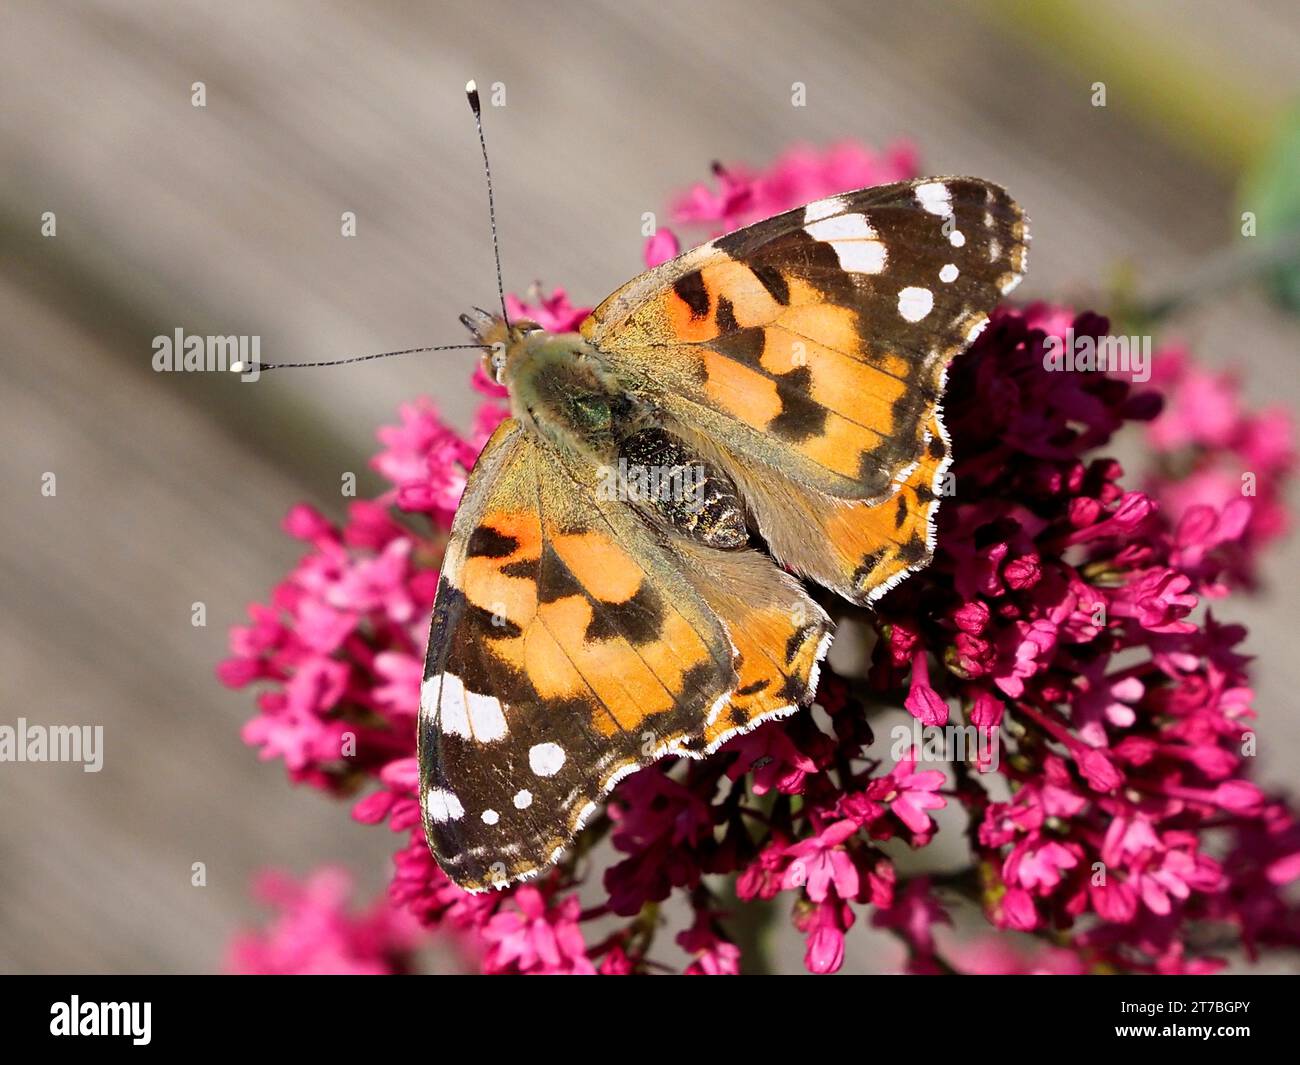 Closeup of painted lady butterfly (Cynthia cardui ou Vanessa cardui) feeding on valerian flower (Centranthus ruber) Stock Photo